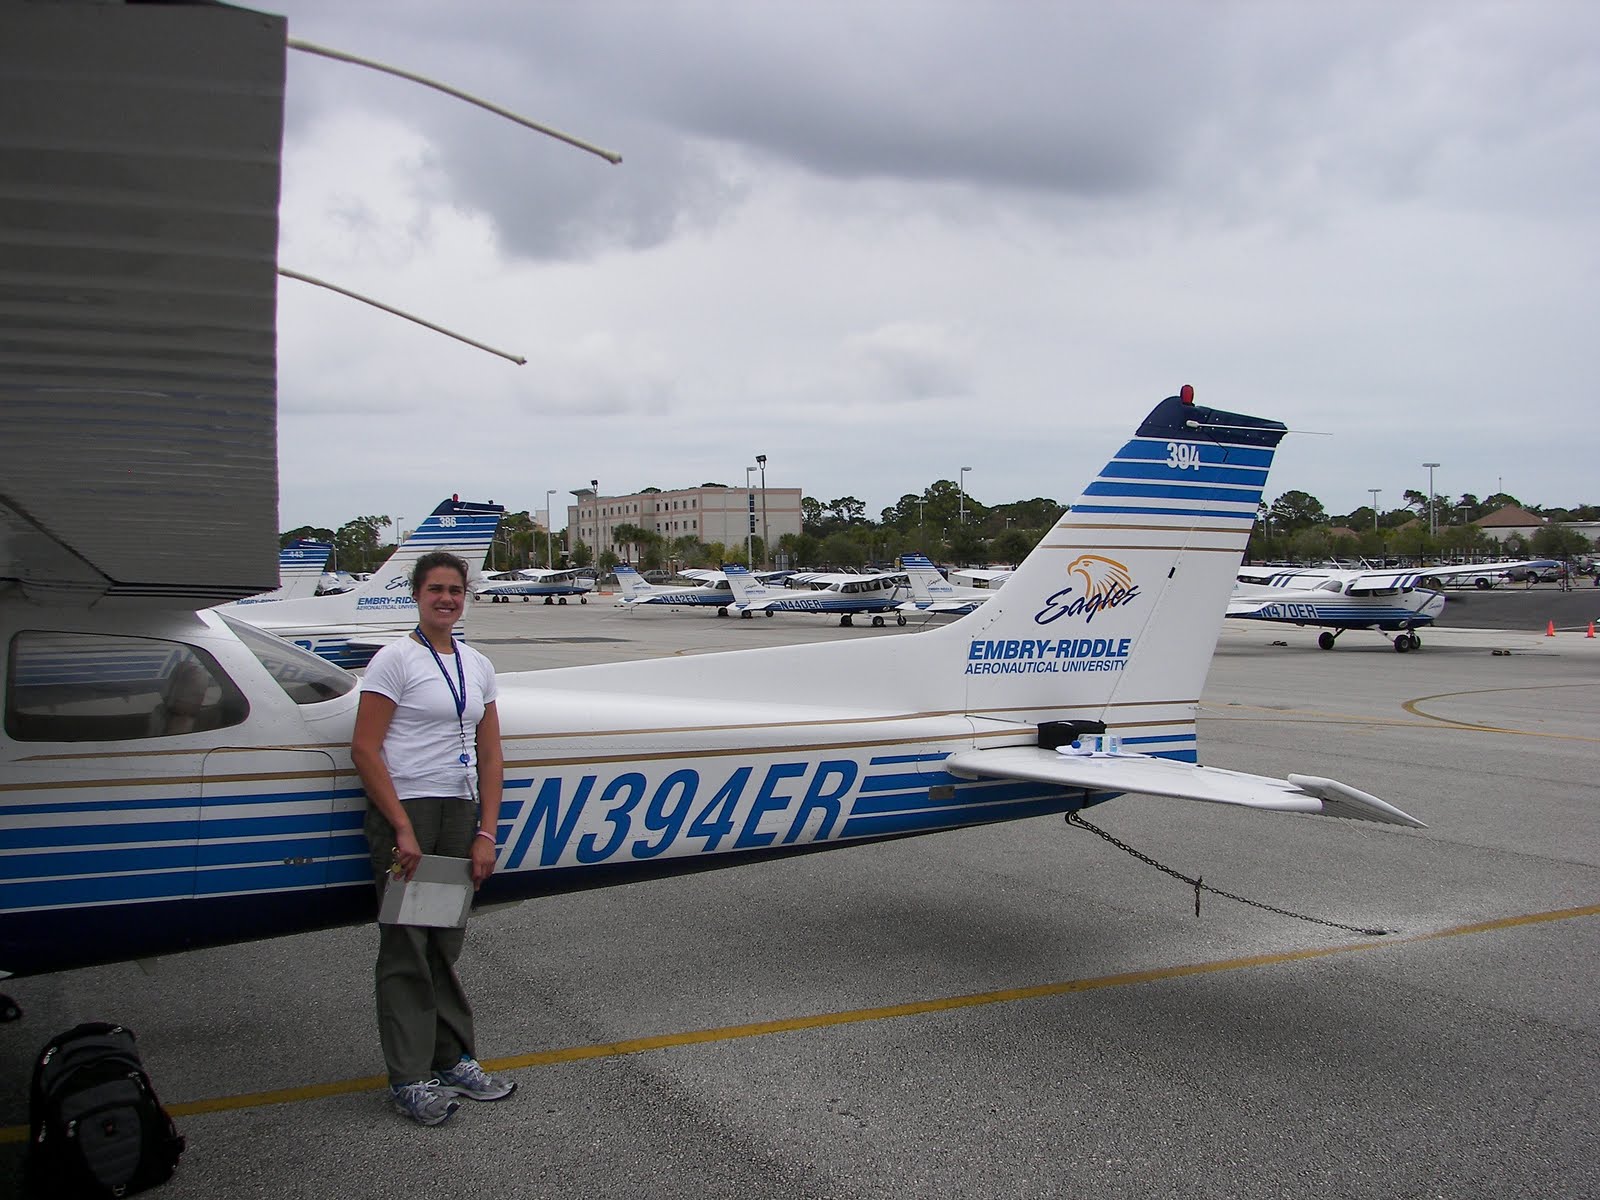 Flight To Success Flying High with EmbryRiddle!